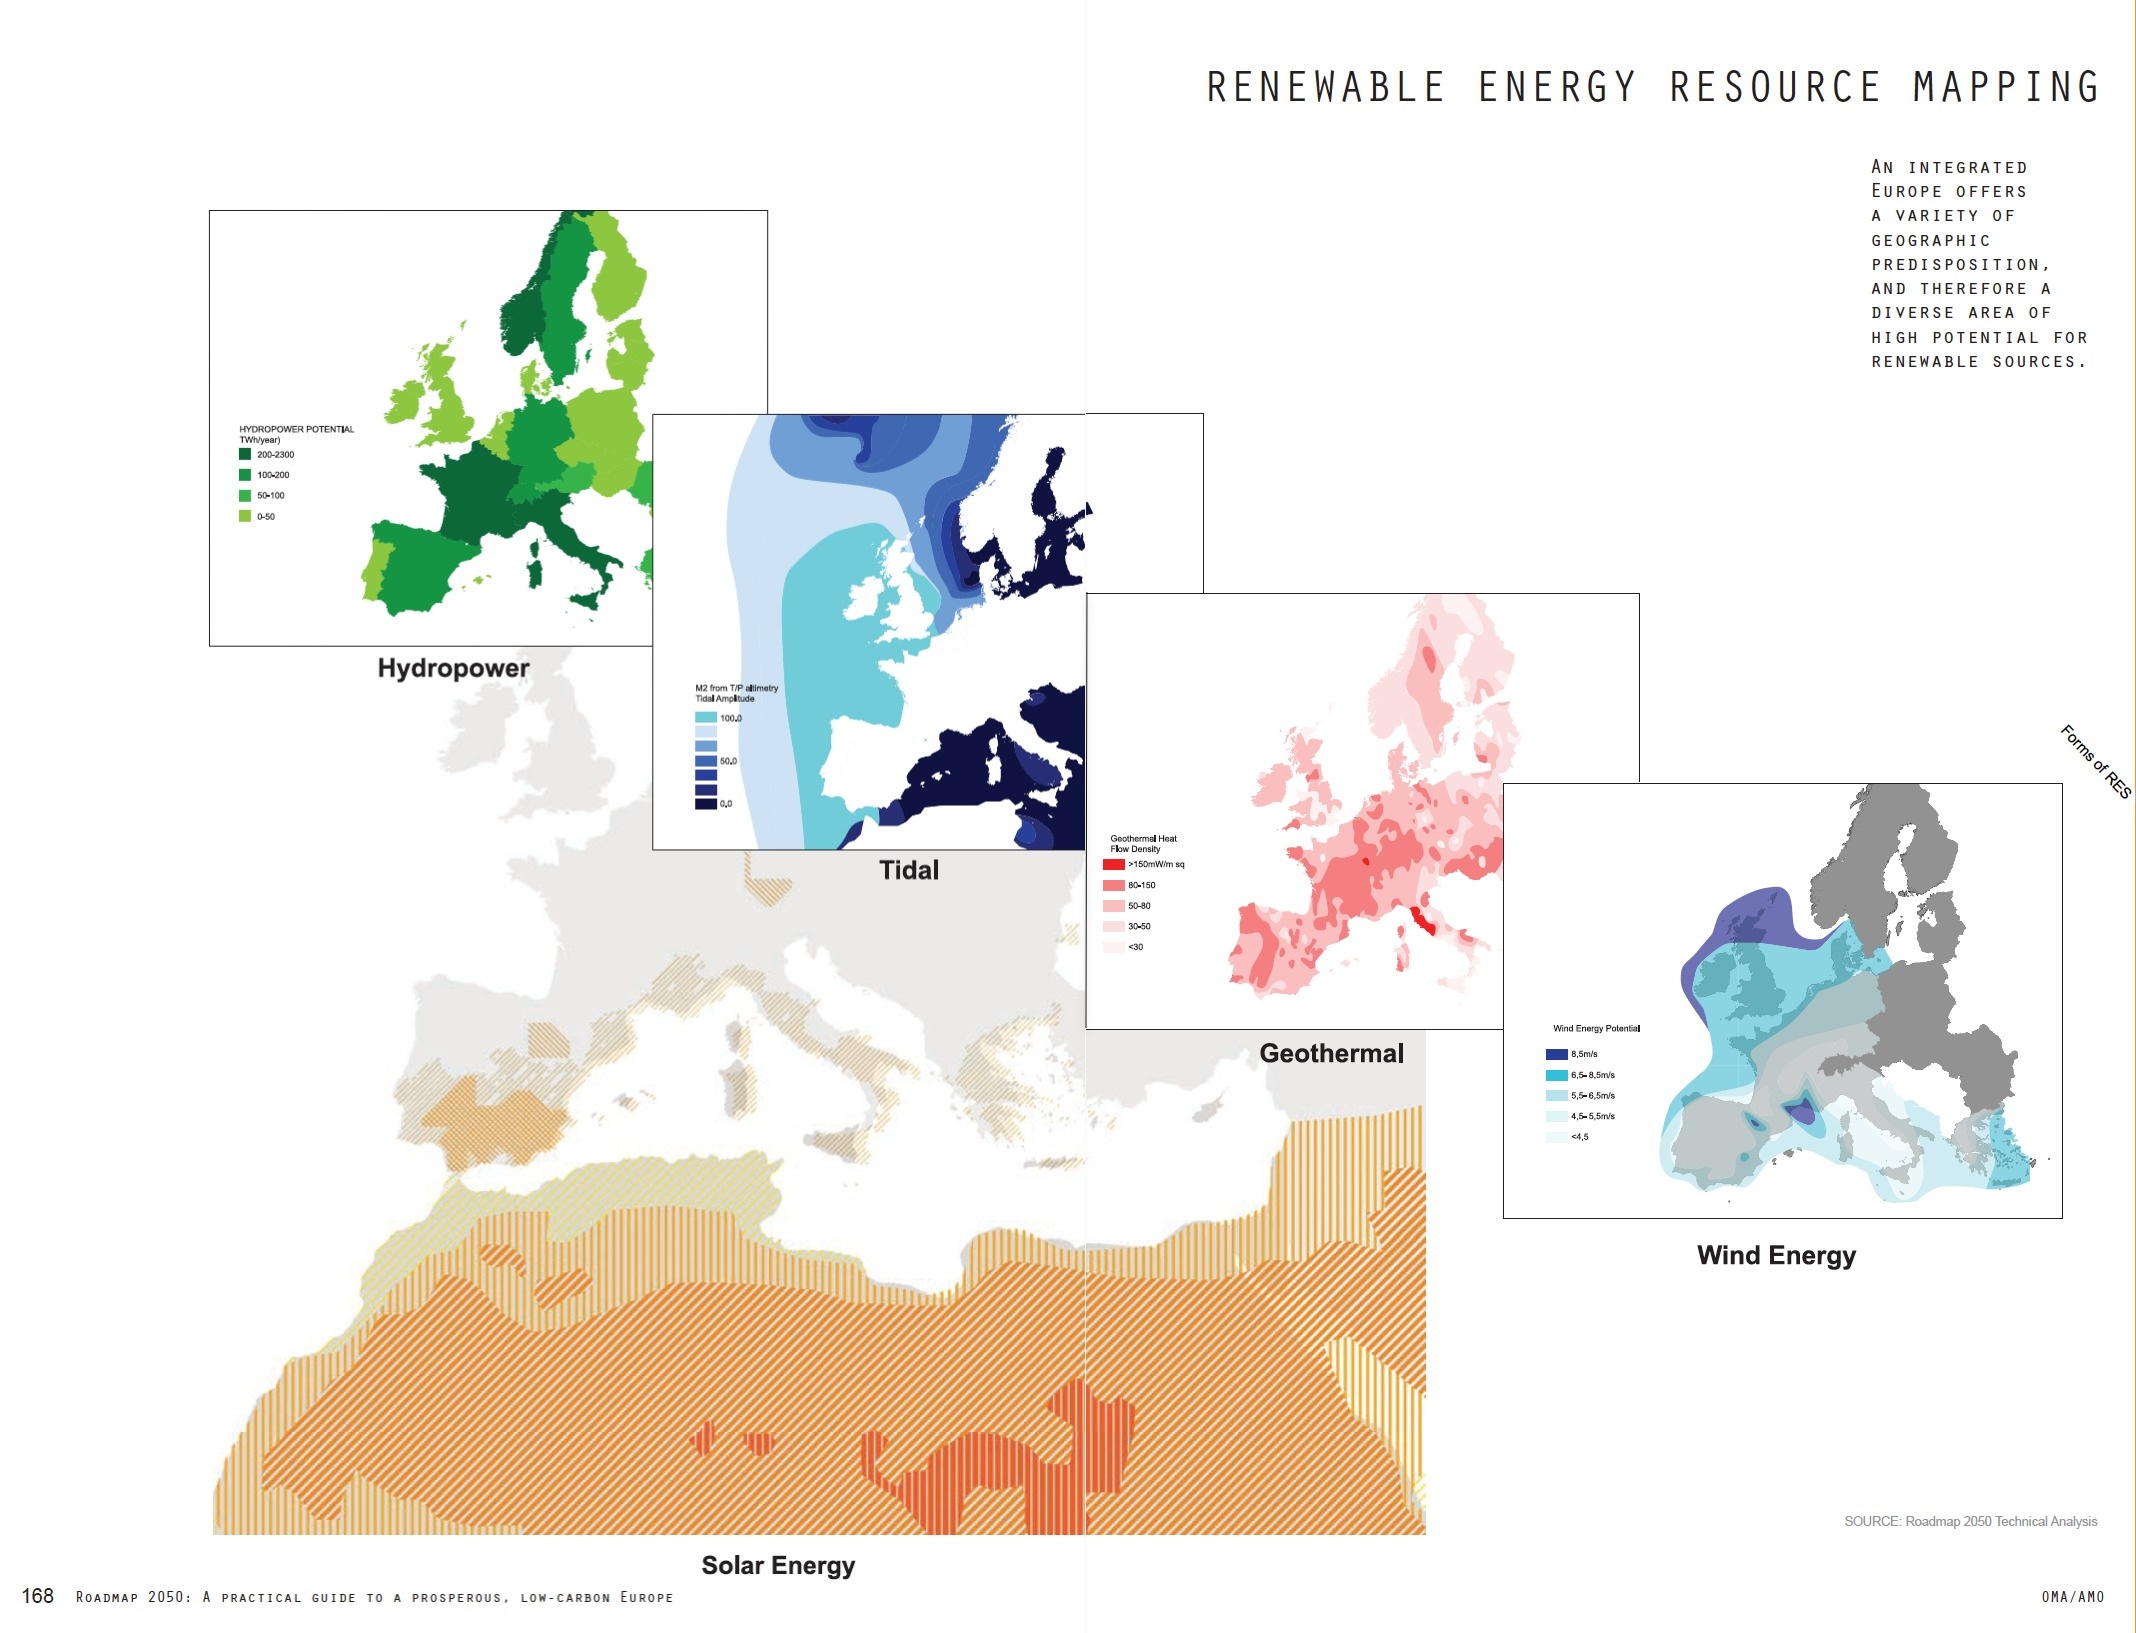 Illustrative map sections displaying the distribution of hydropower, tidal, geothermal, wind, and solar energy sources in different regions.